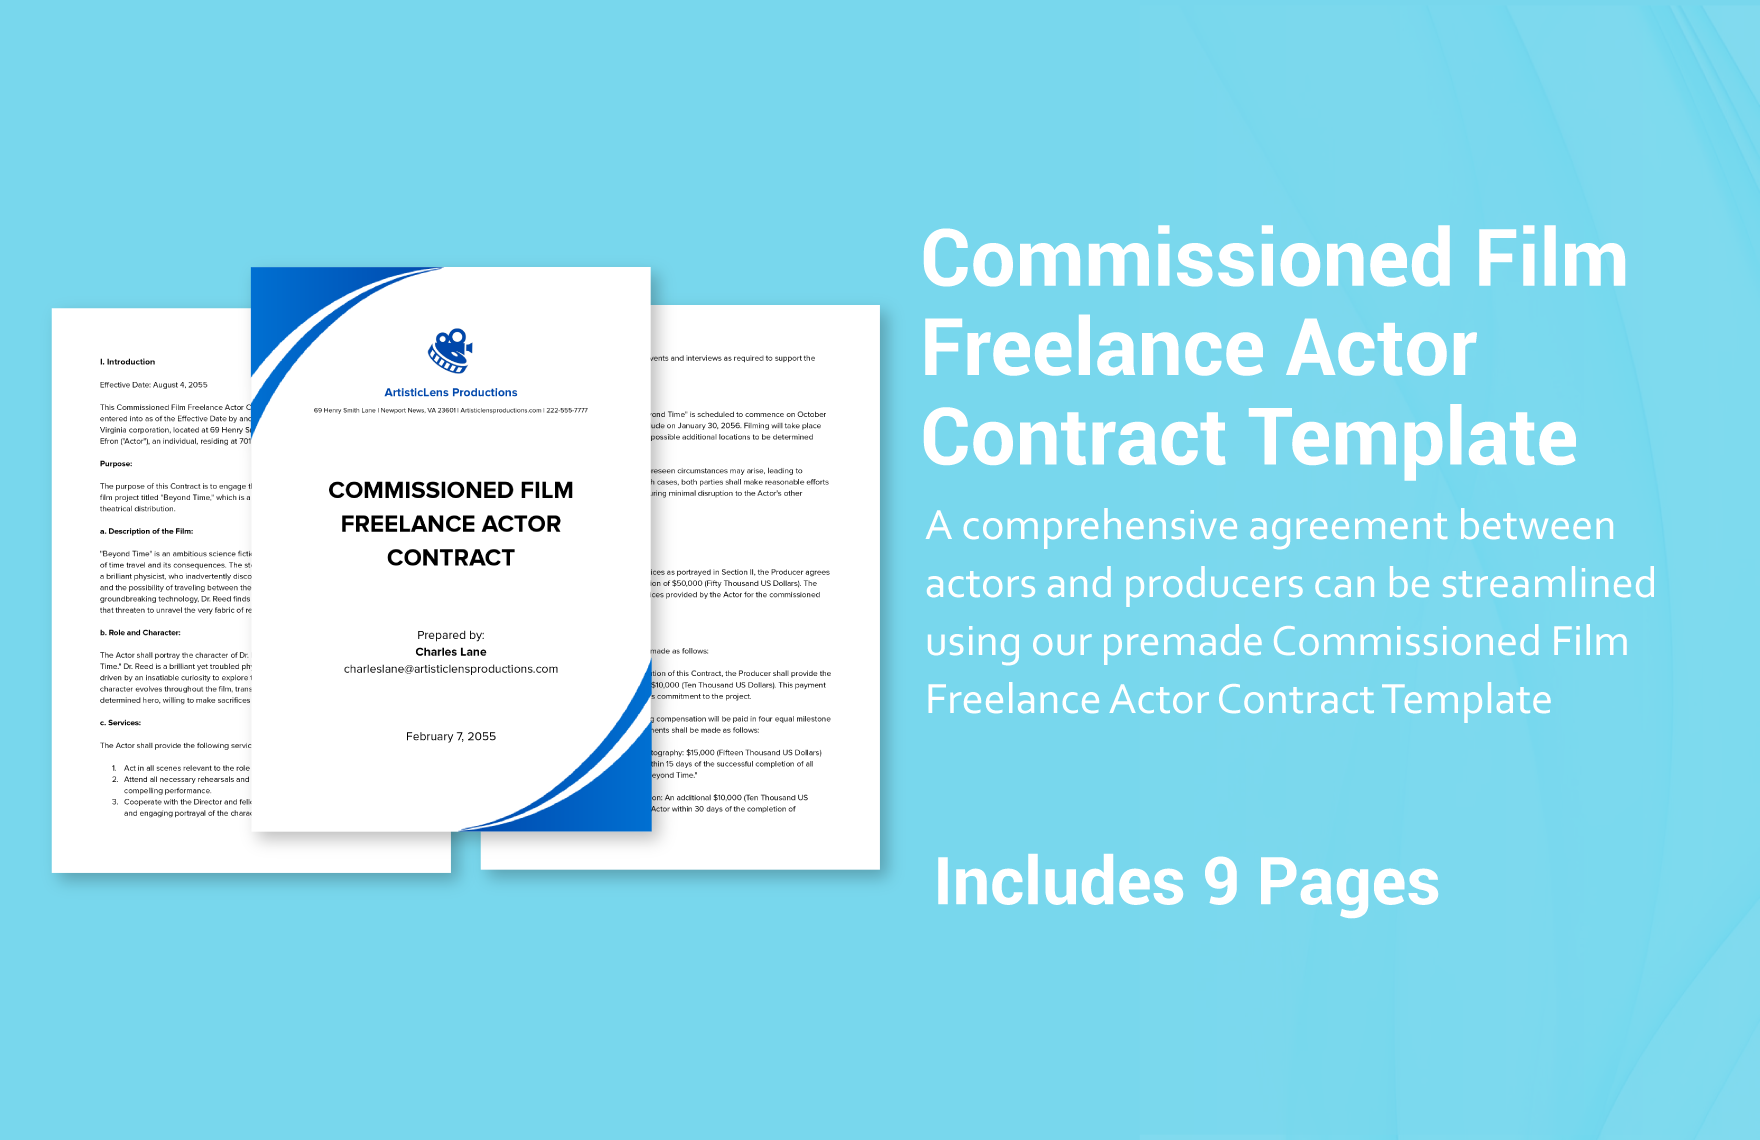 Commissioned Film Freelance Actor Contract Template